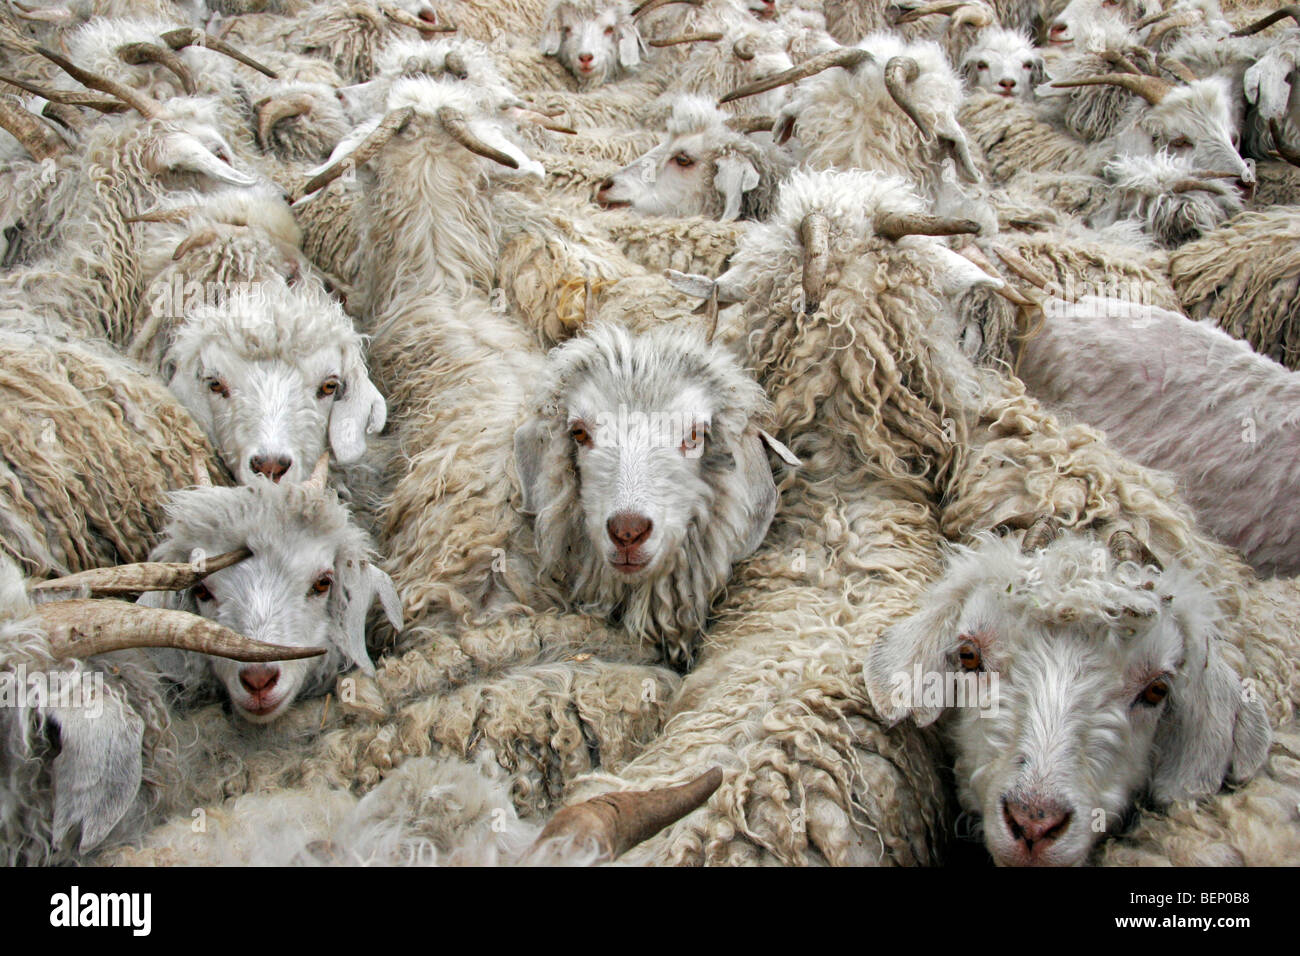 Flock of Angora goats (Capra hircus) to produce mohair wool in Lesotho, Africa Stock Photo